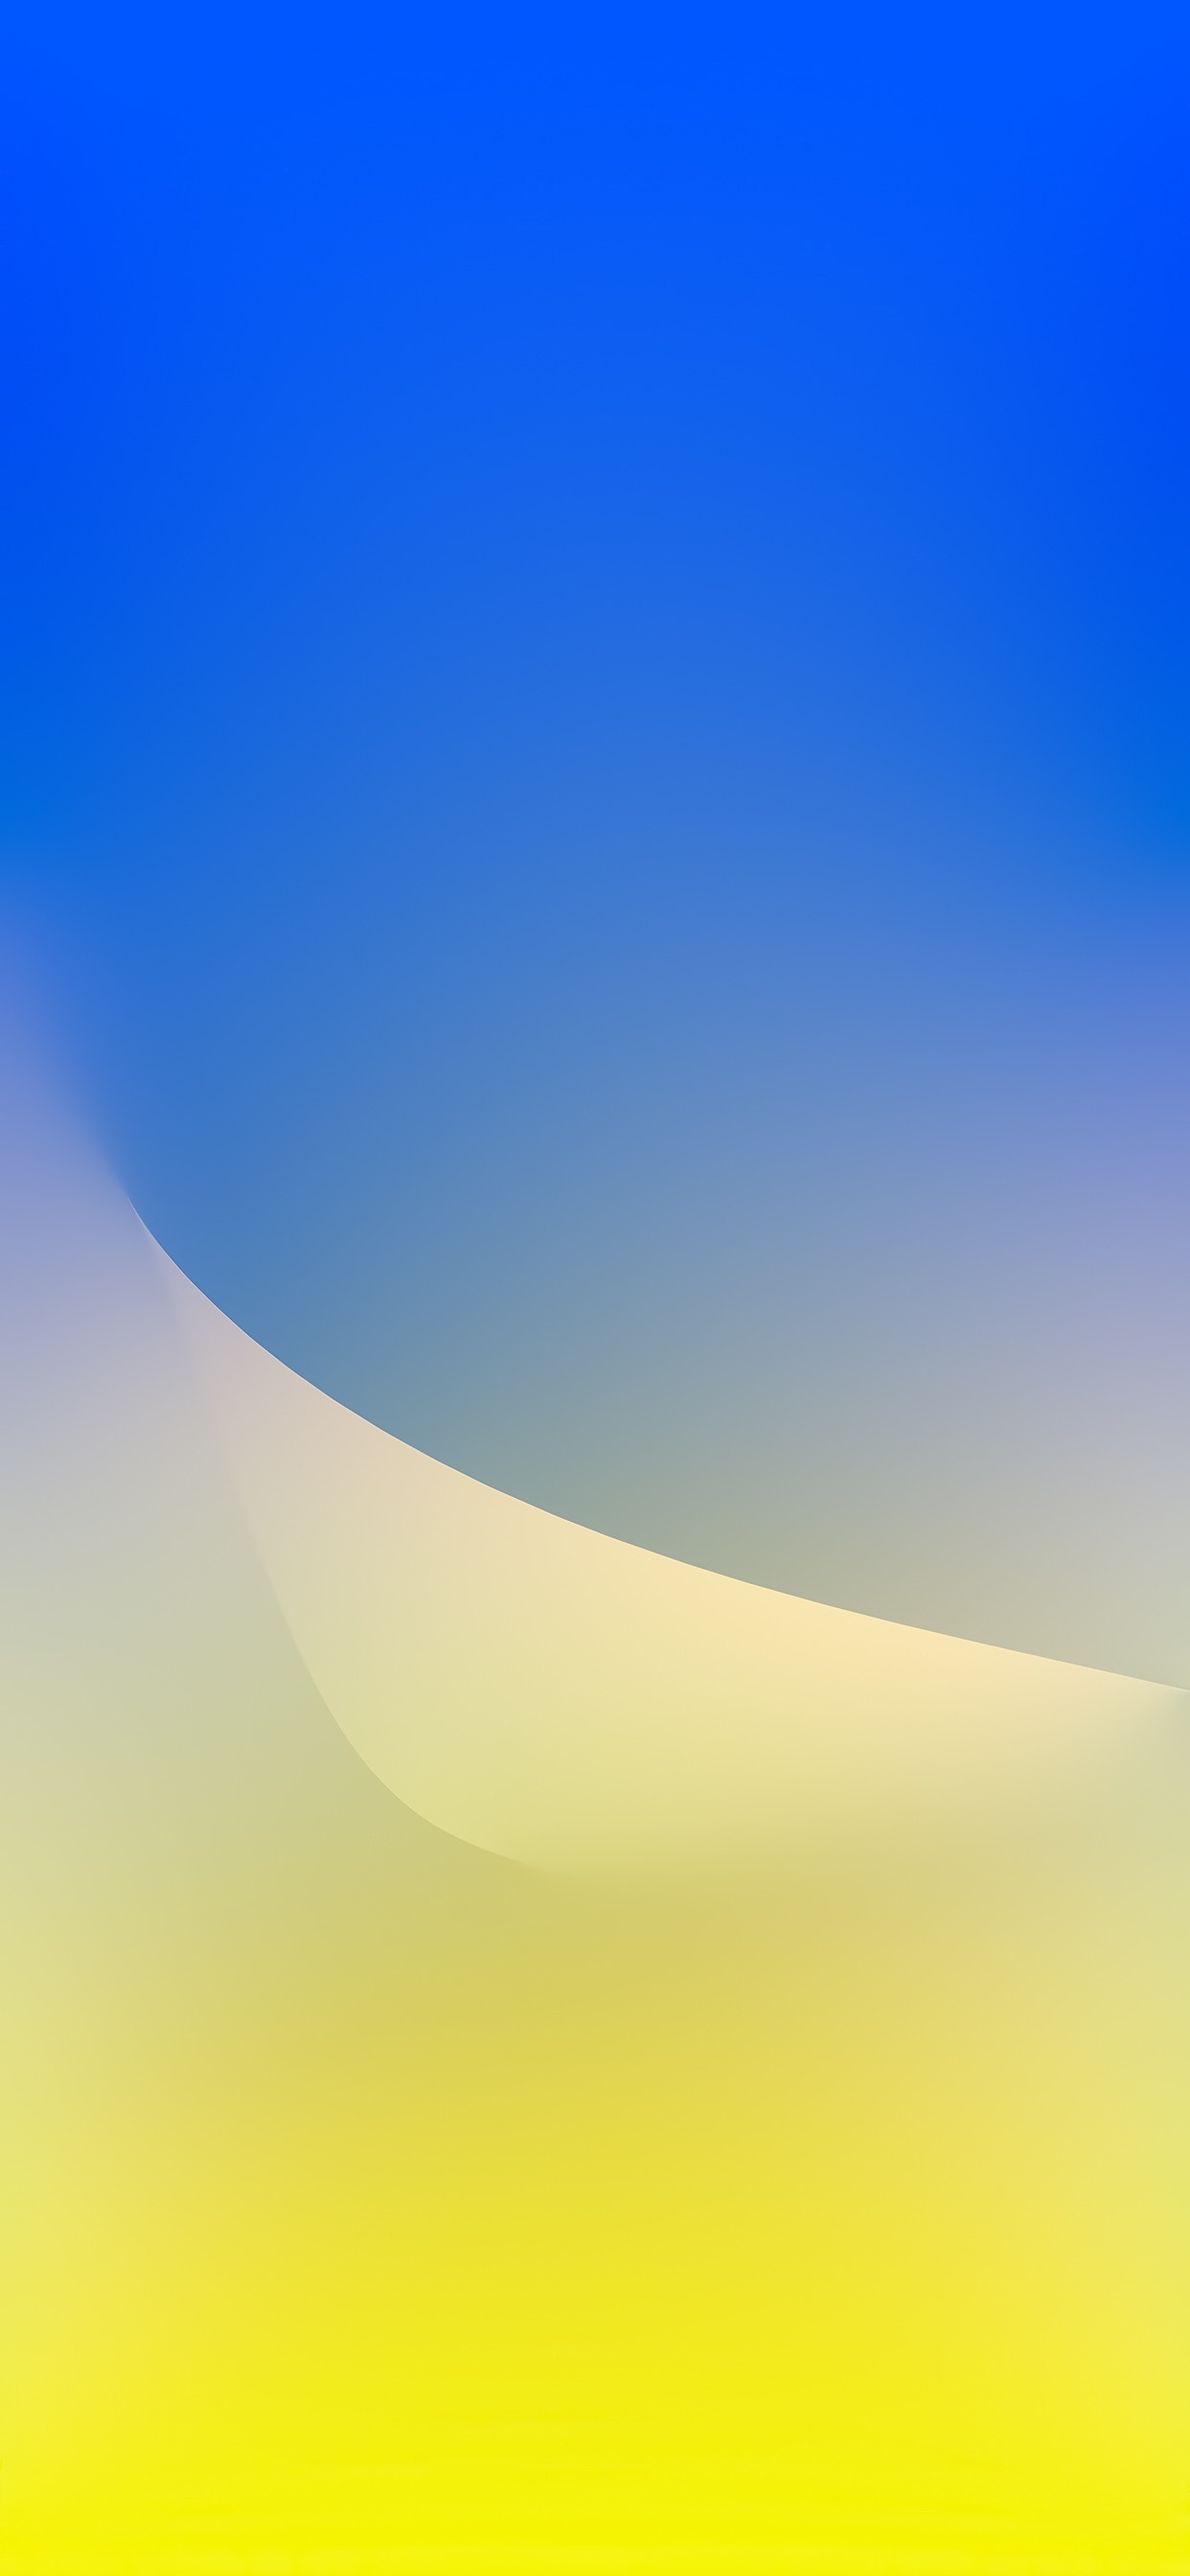 1242x2688 Blue and Yellow Abstract iPhone Wallpapers Top Free Blue and Yellow Abstract iPhone Backgrounds